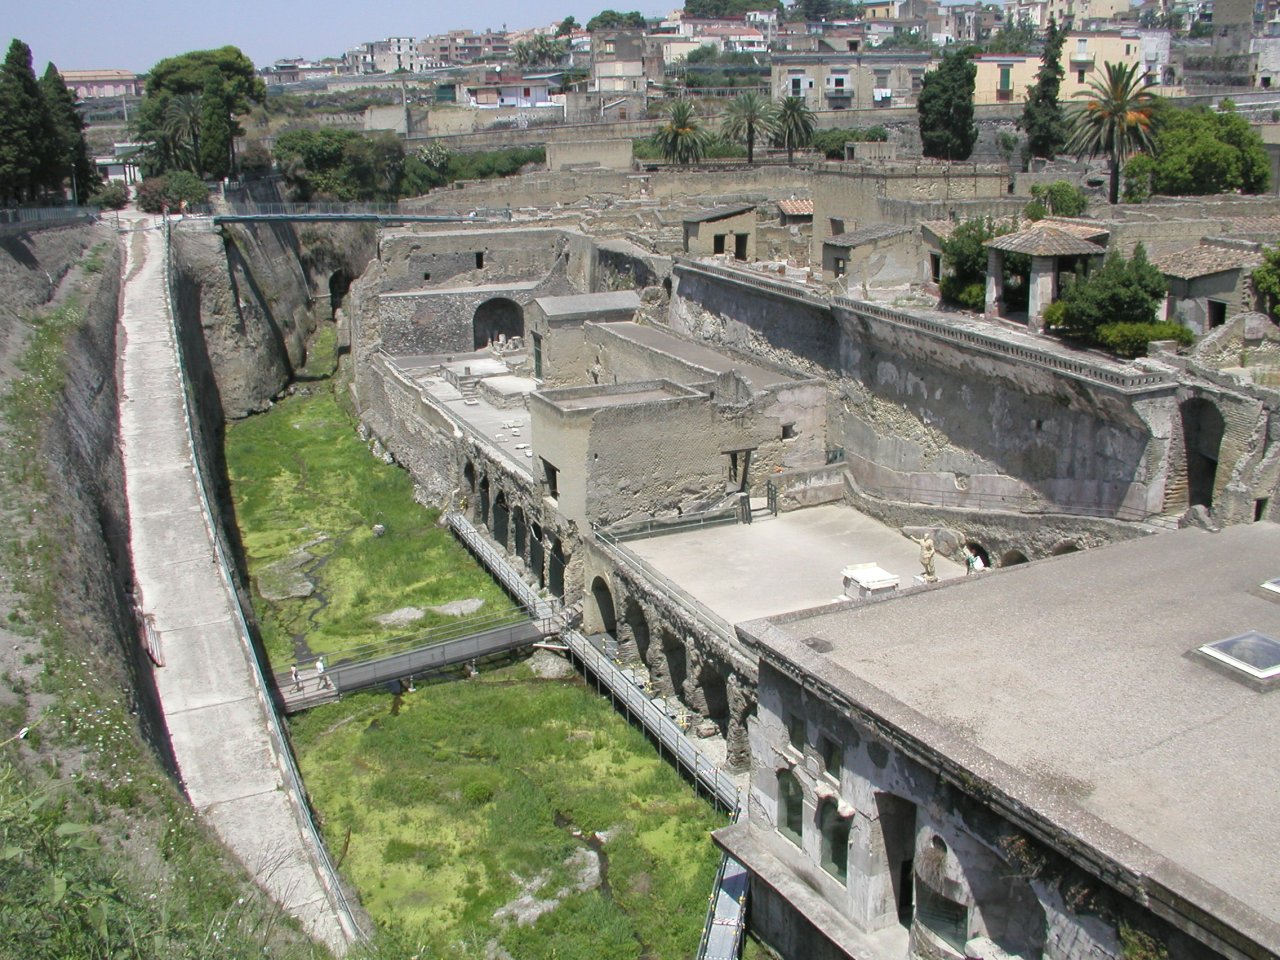 JPEG image - Herculaneum : looking down on what used to be the sea front. The arched openings were used for boat storage and warehousing.  ...